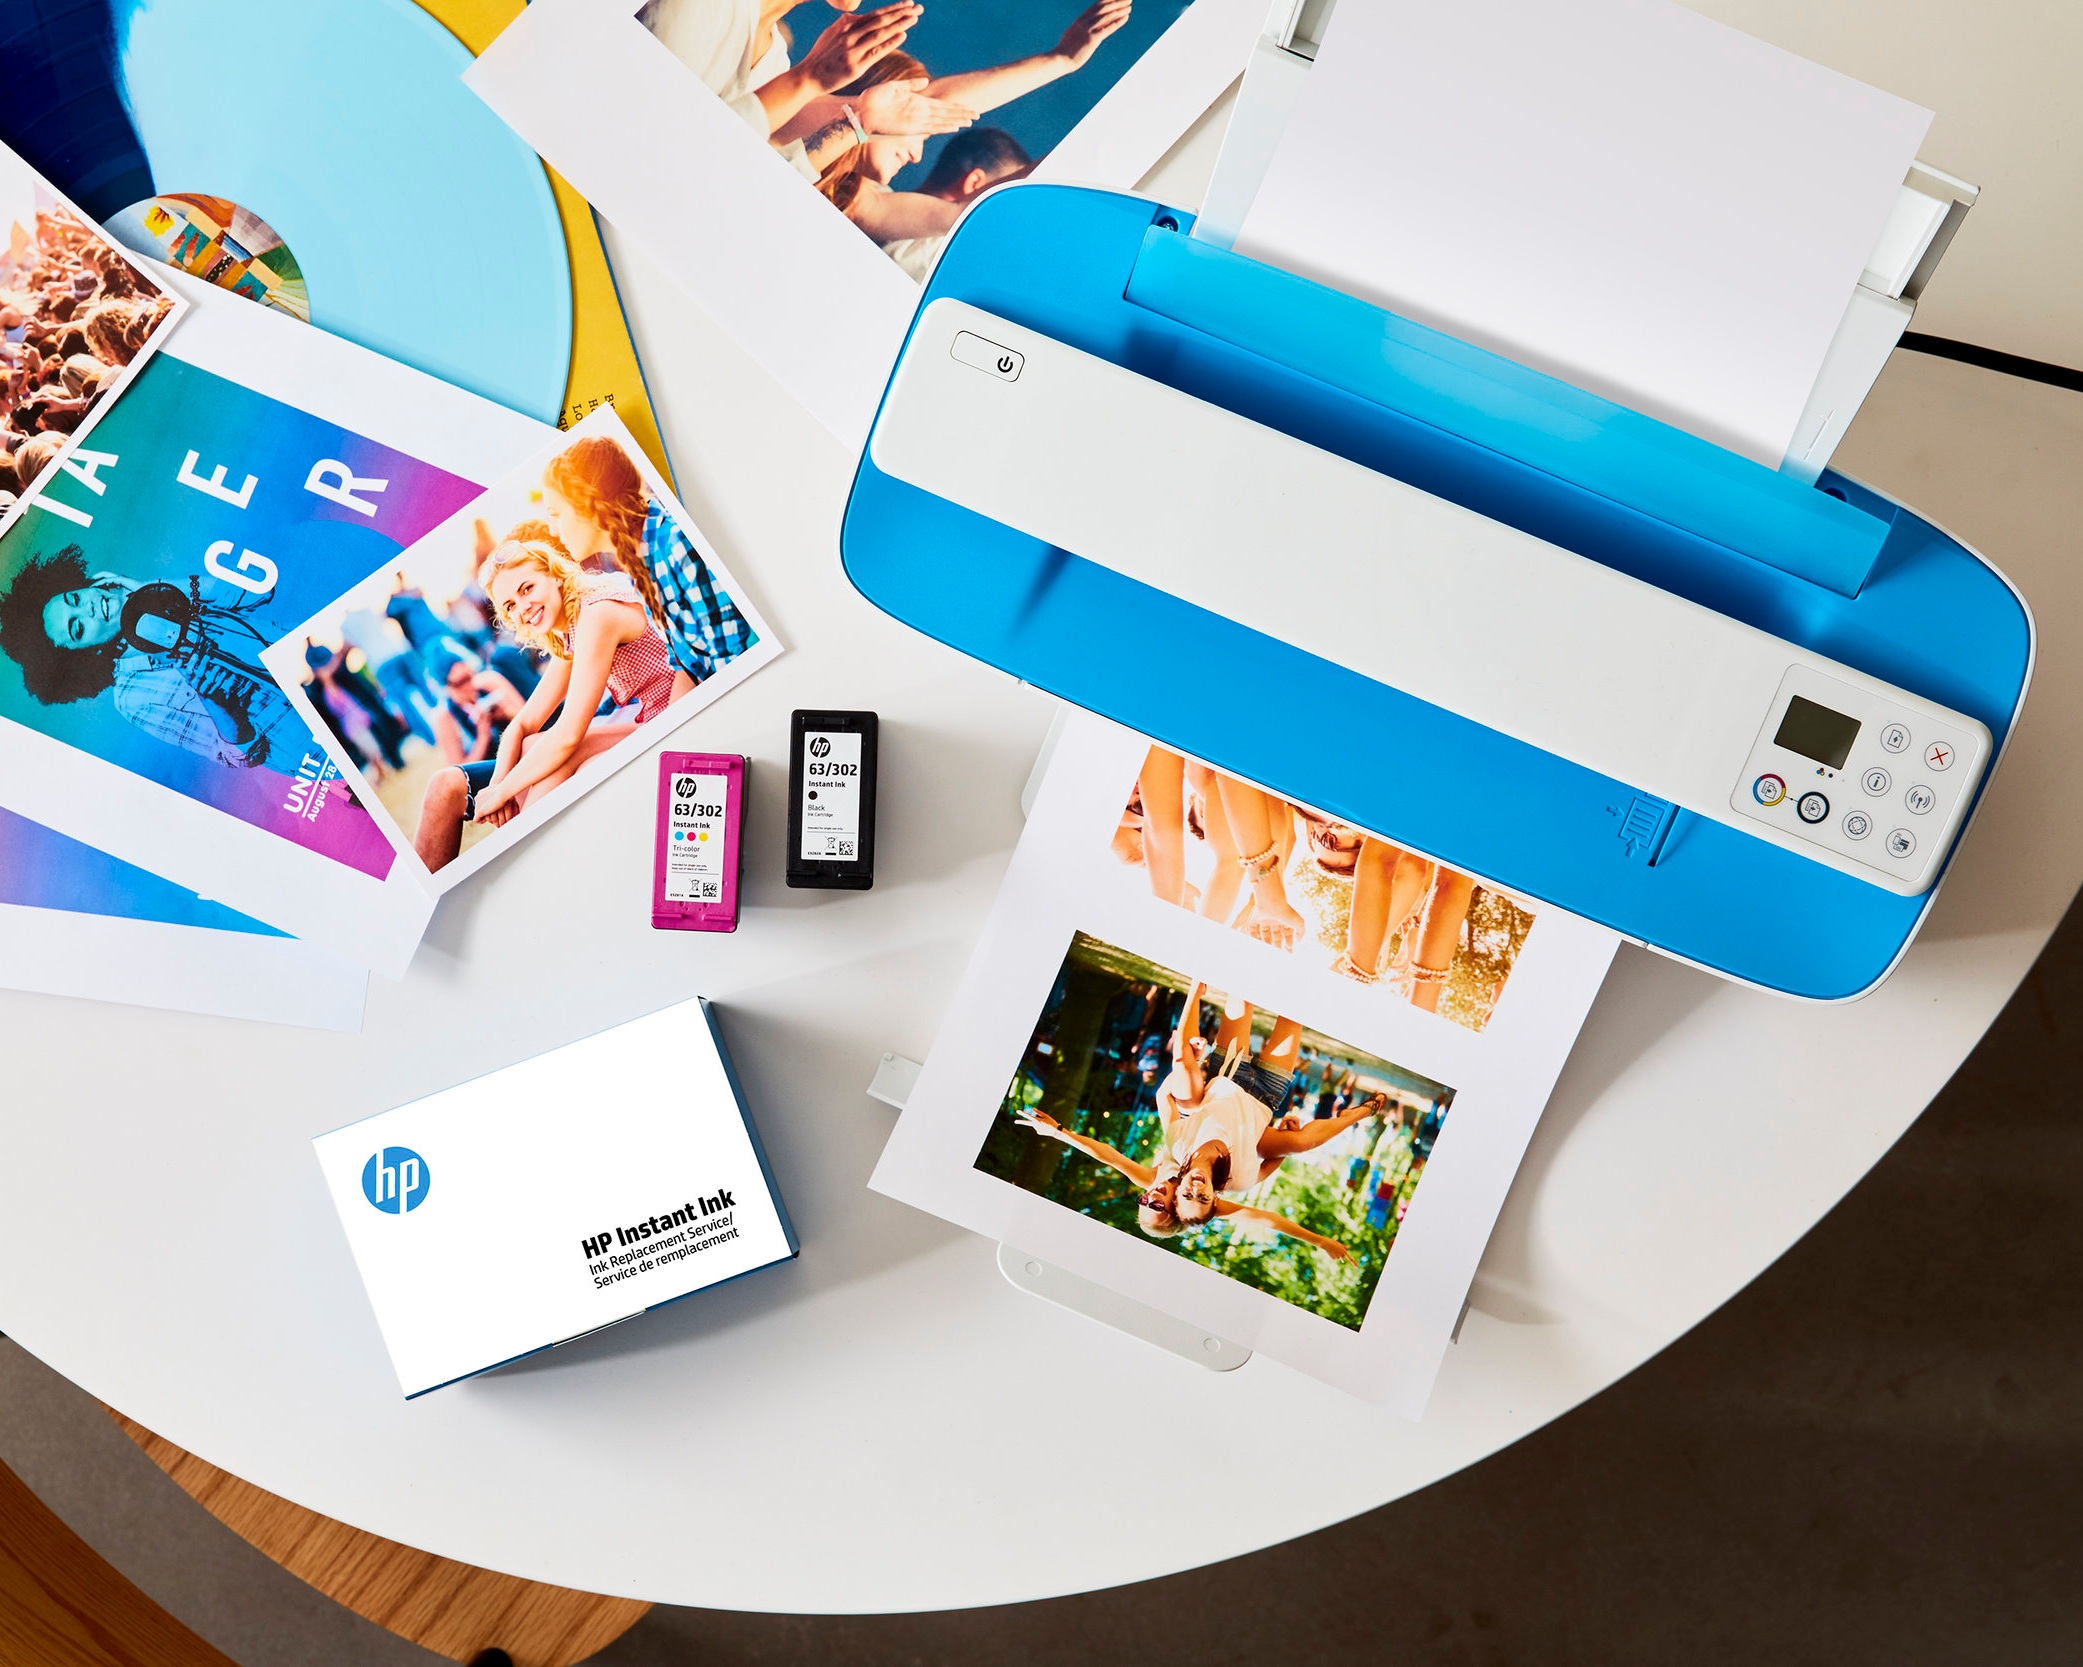 HP: Reinventing HP's ink subscription business